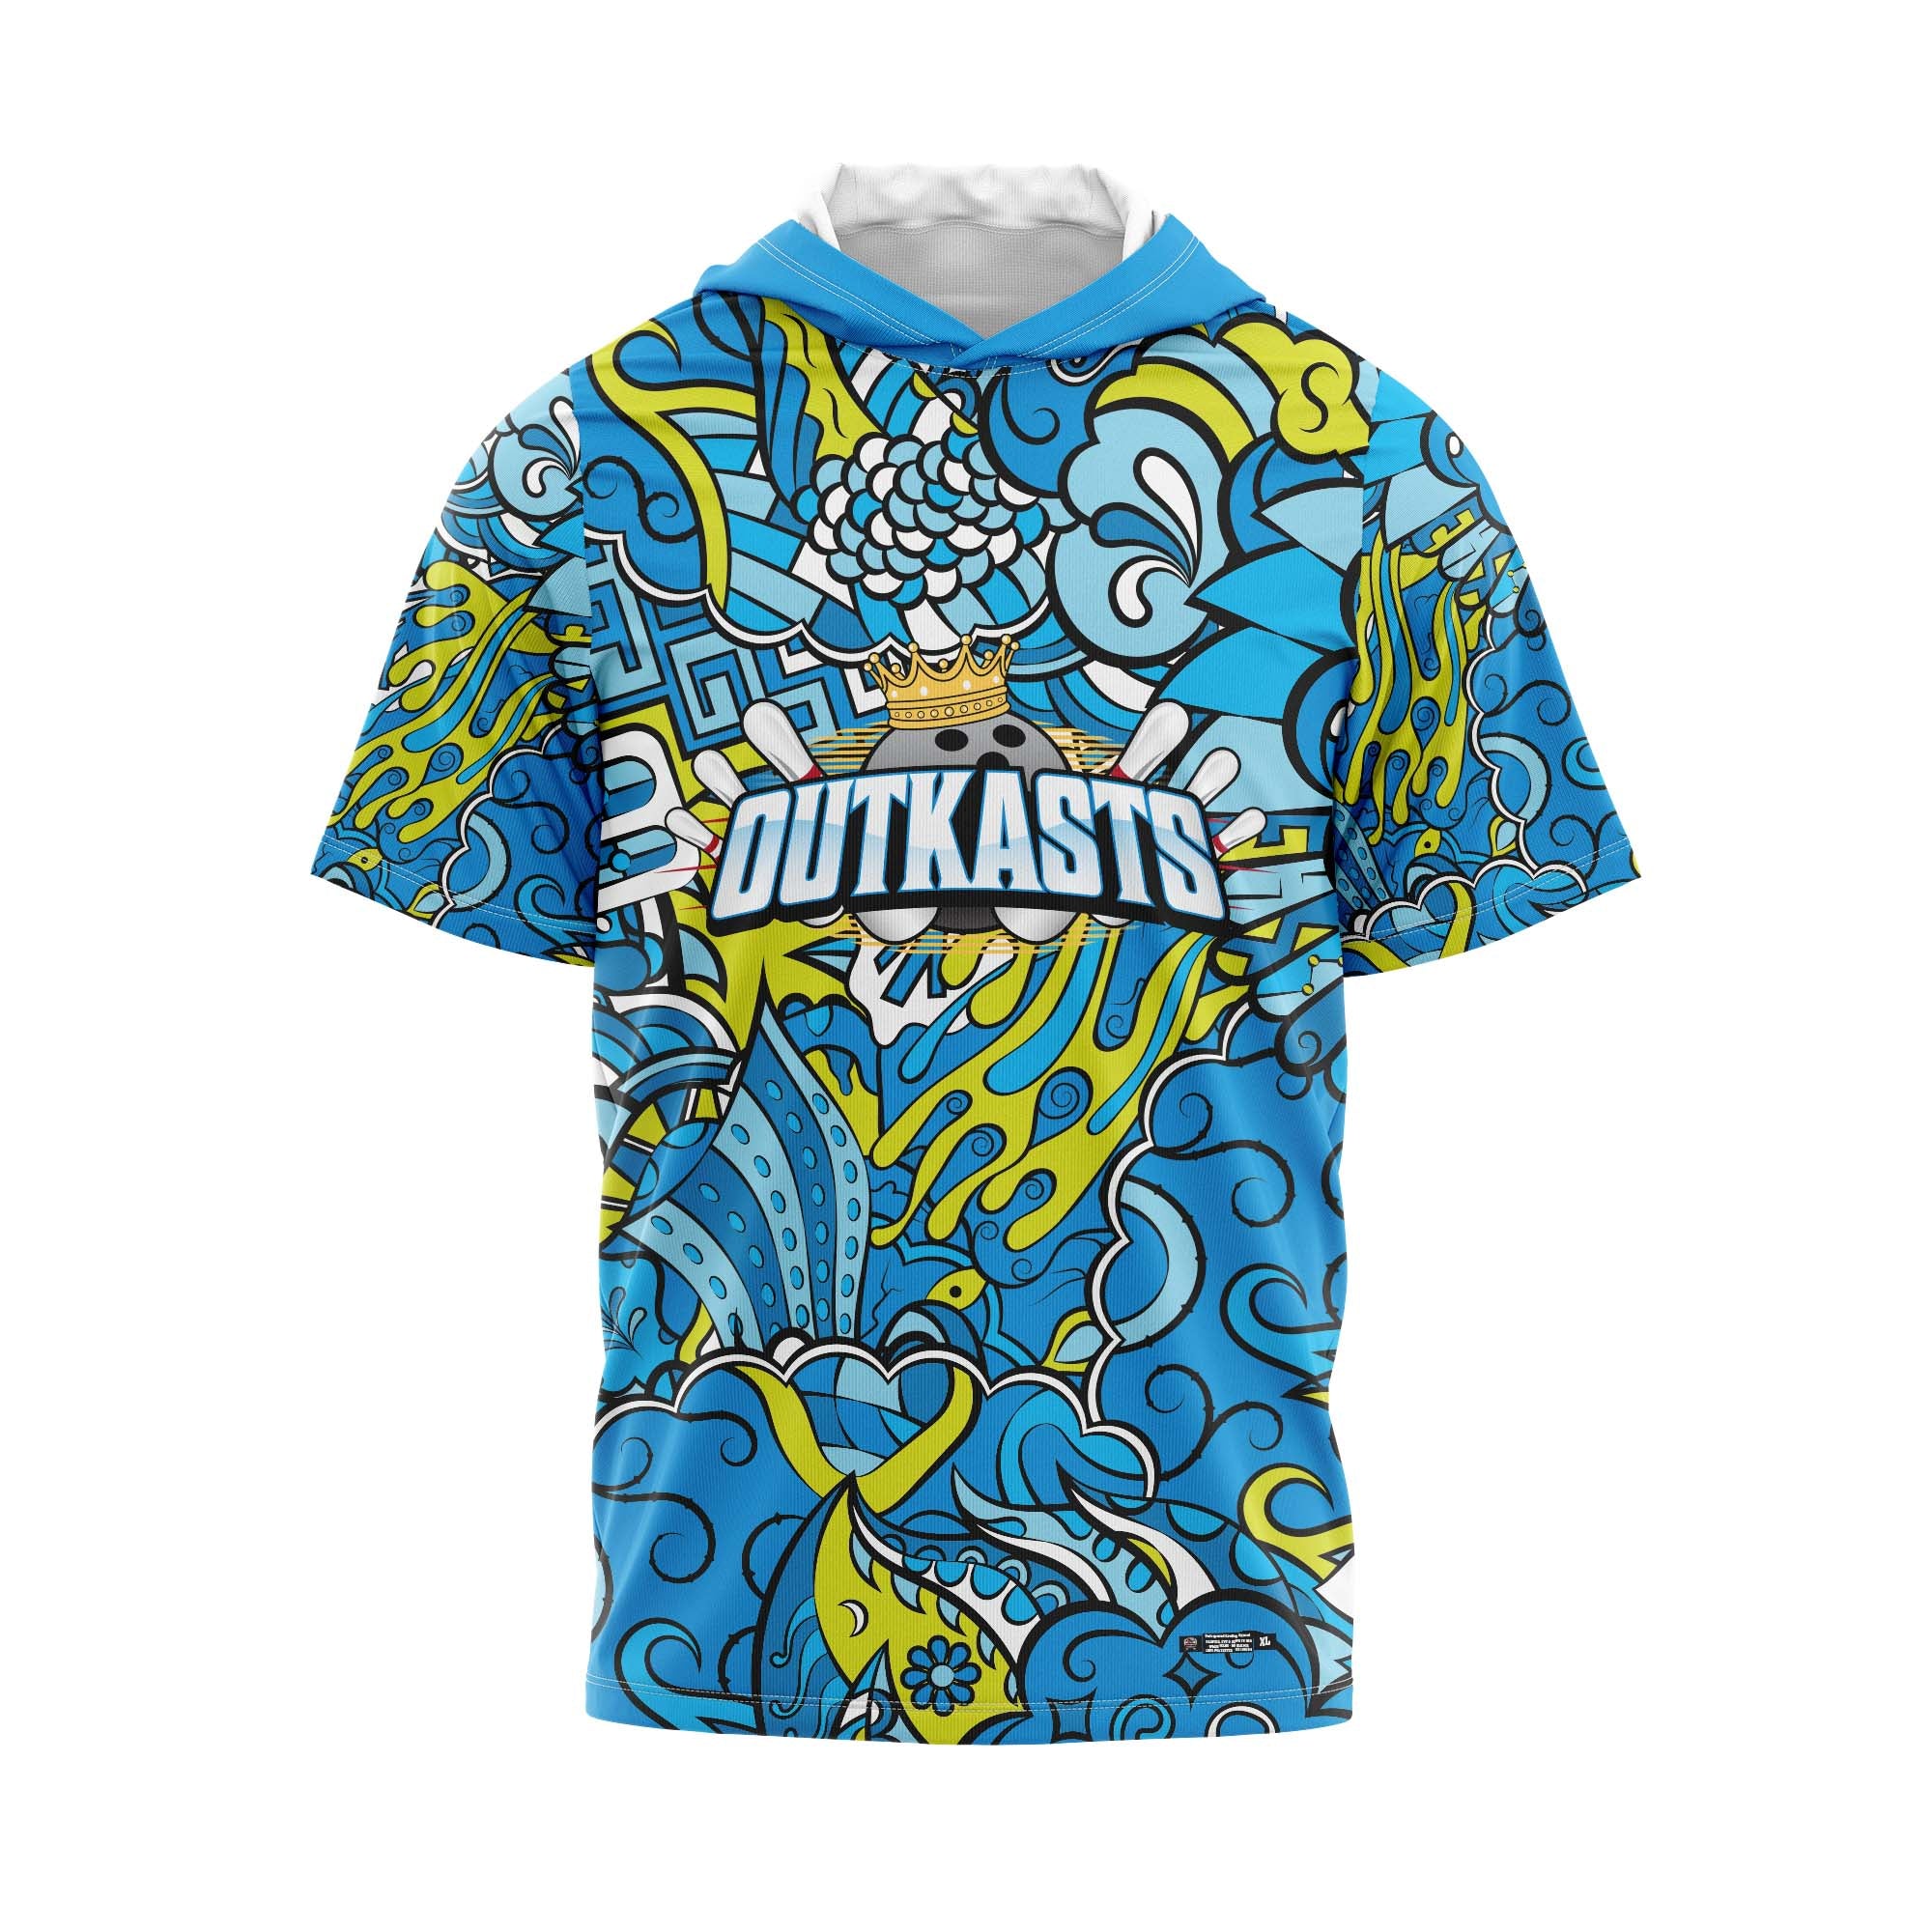 Outkasts Doodle Jersey